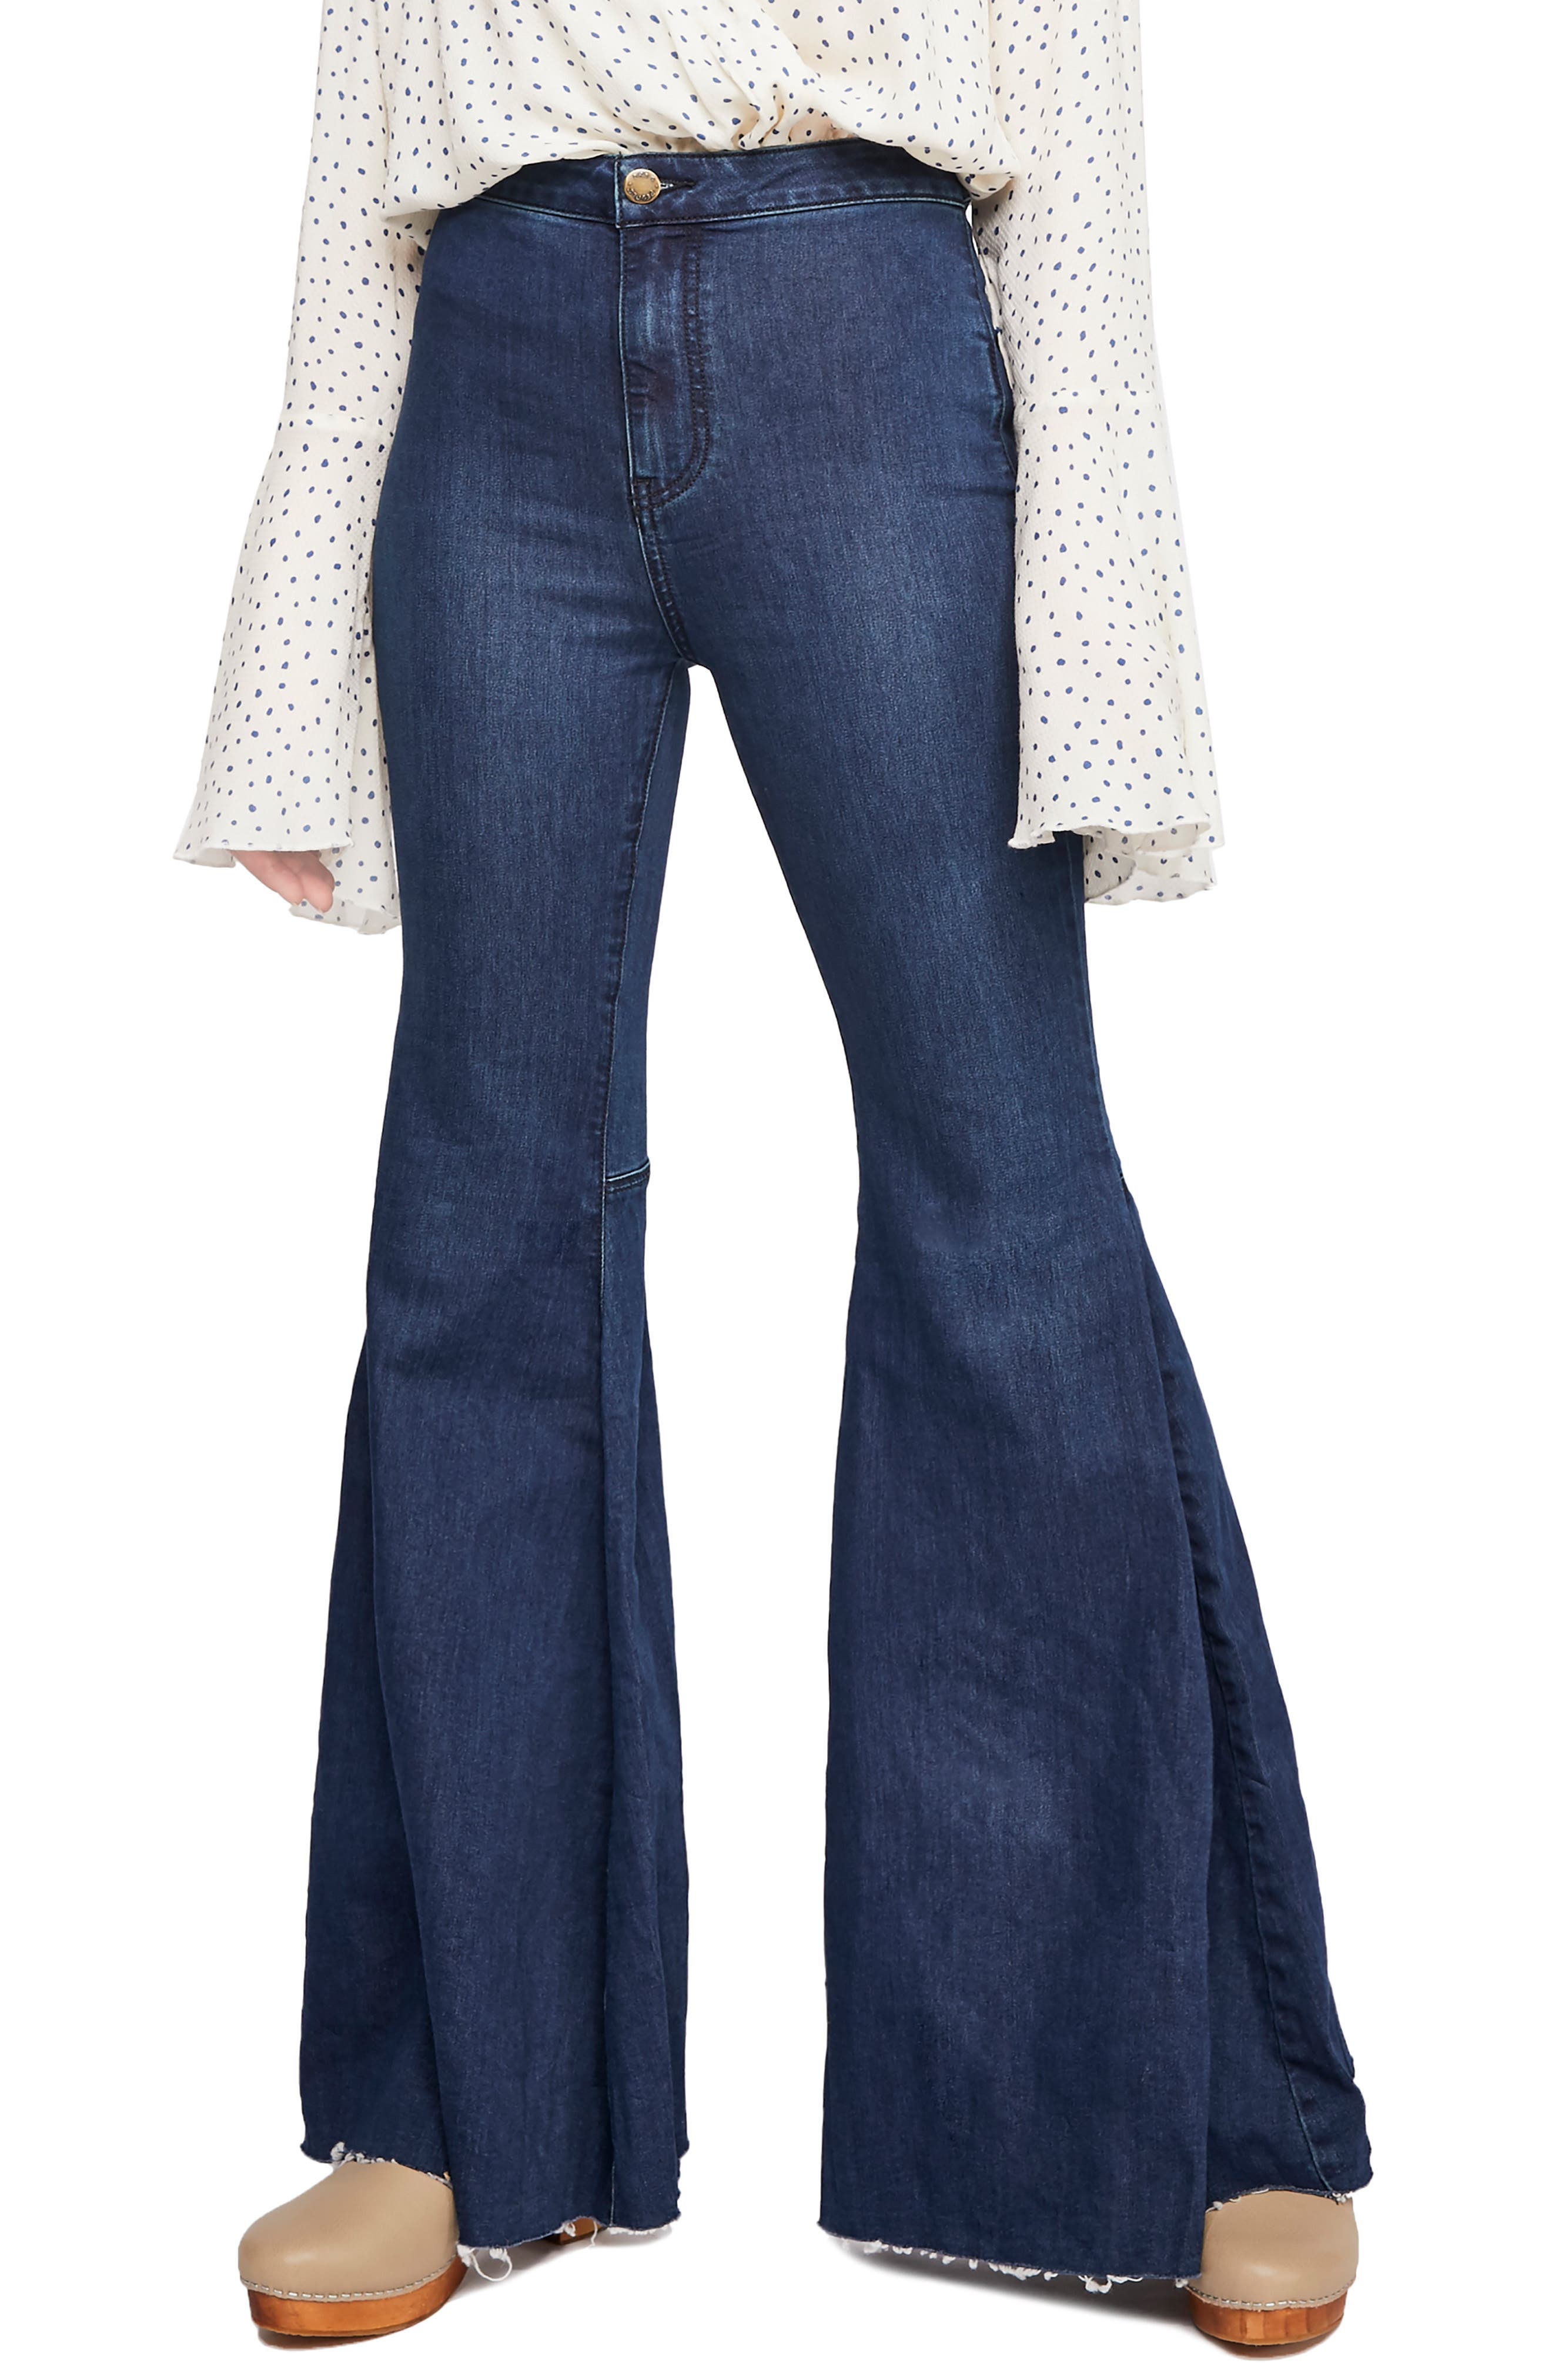 just float on flare jeans short